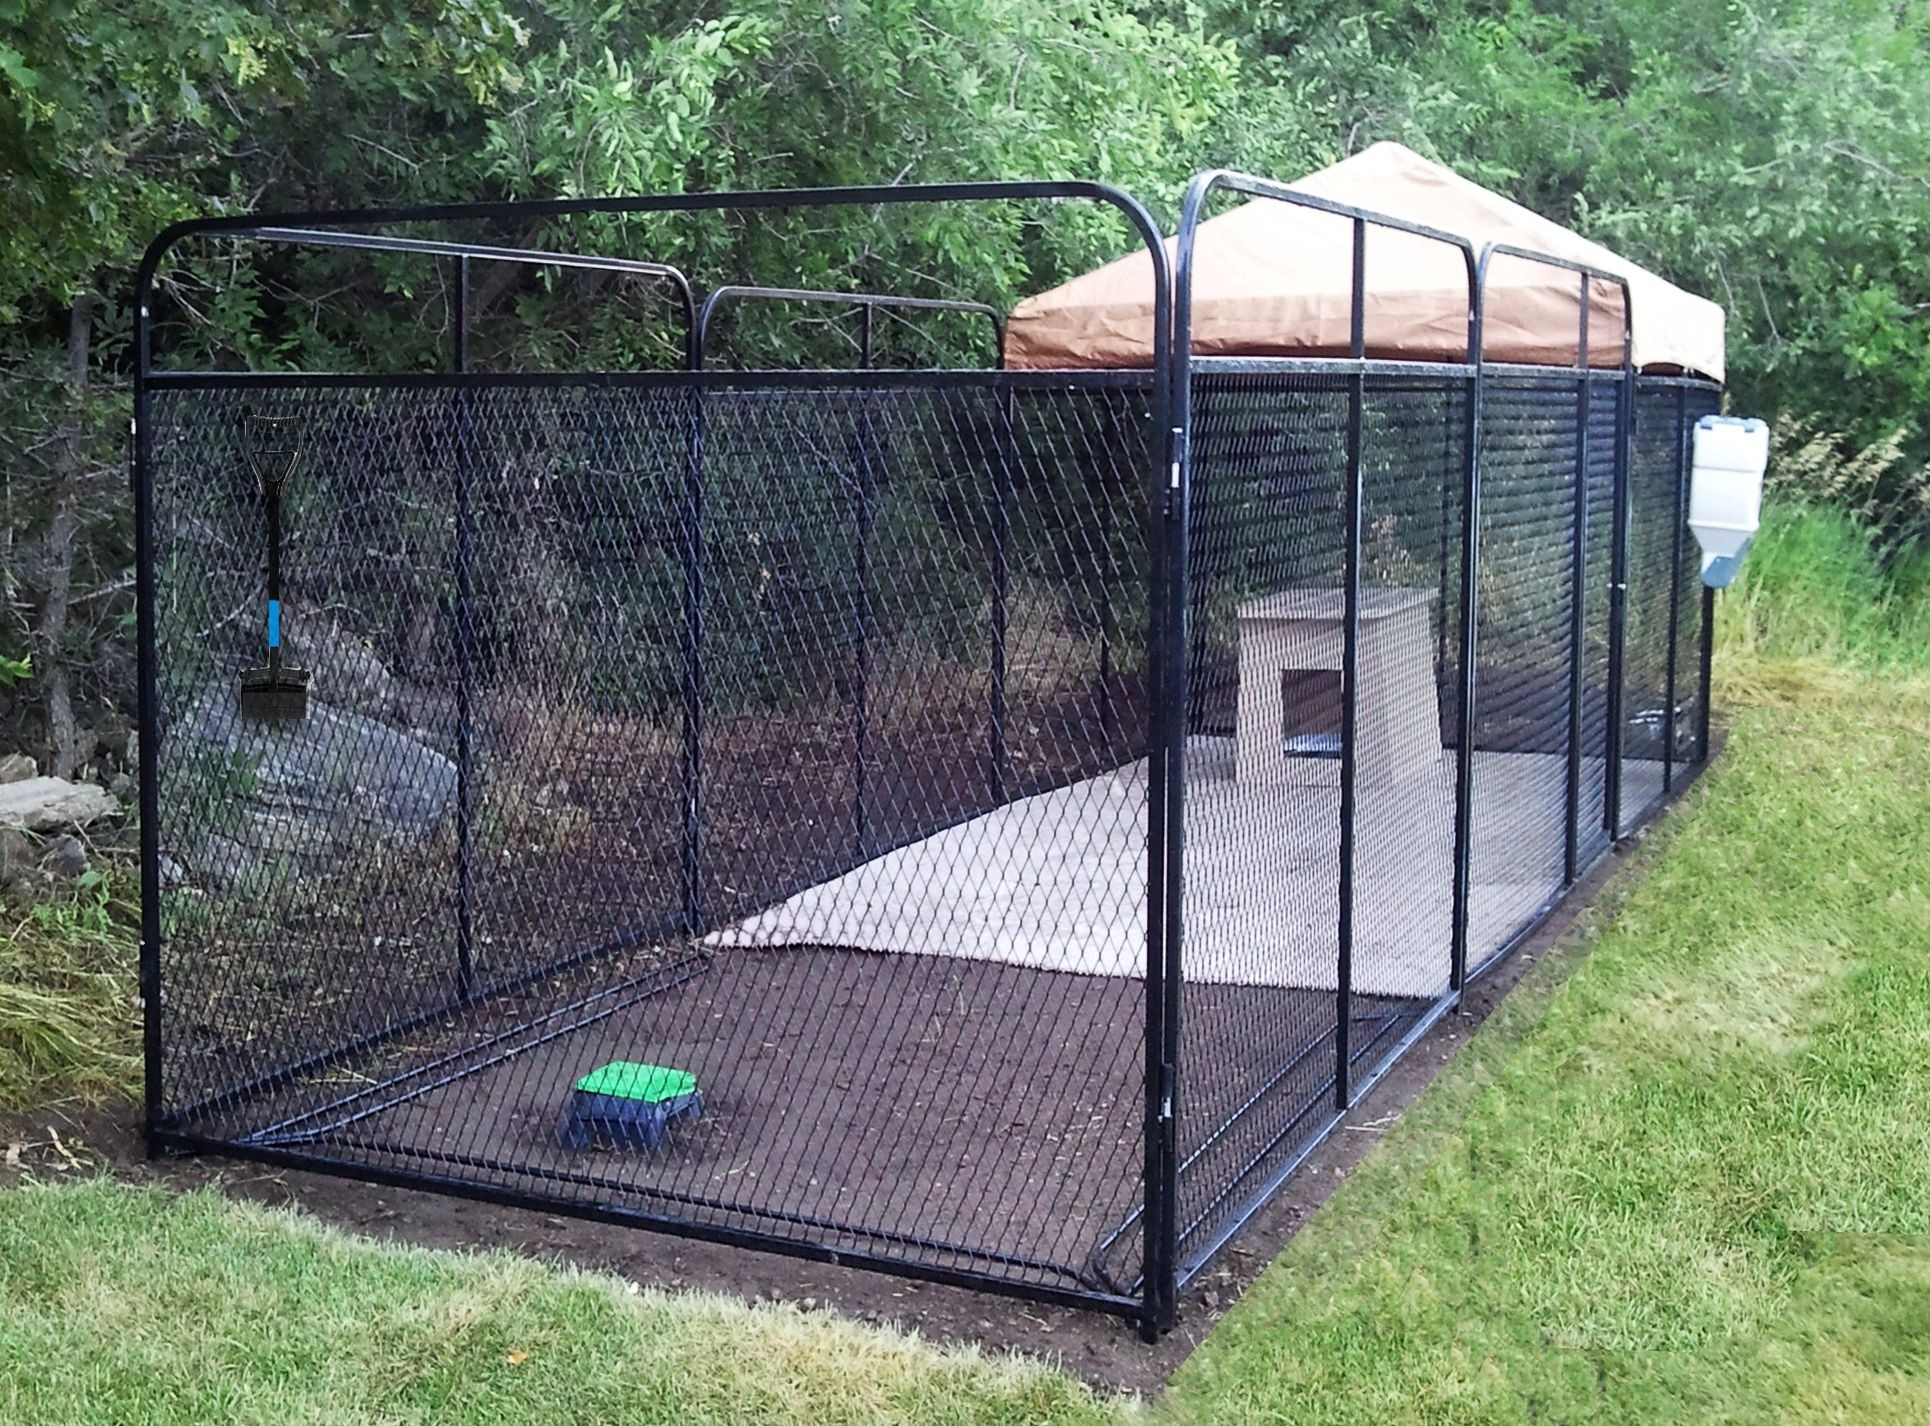 40 New Stock Of Dog Fence Cage Best Fence Gallery Inspiration For You throughout sizing 1930 X 1426